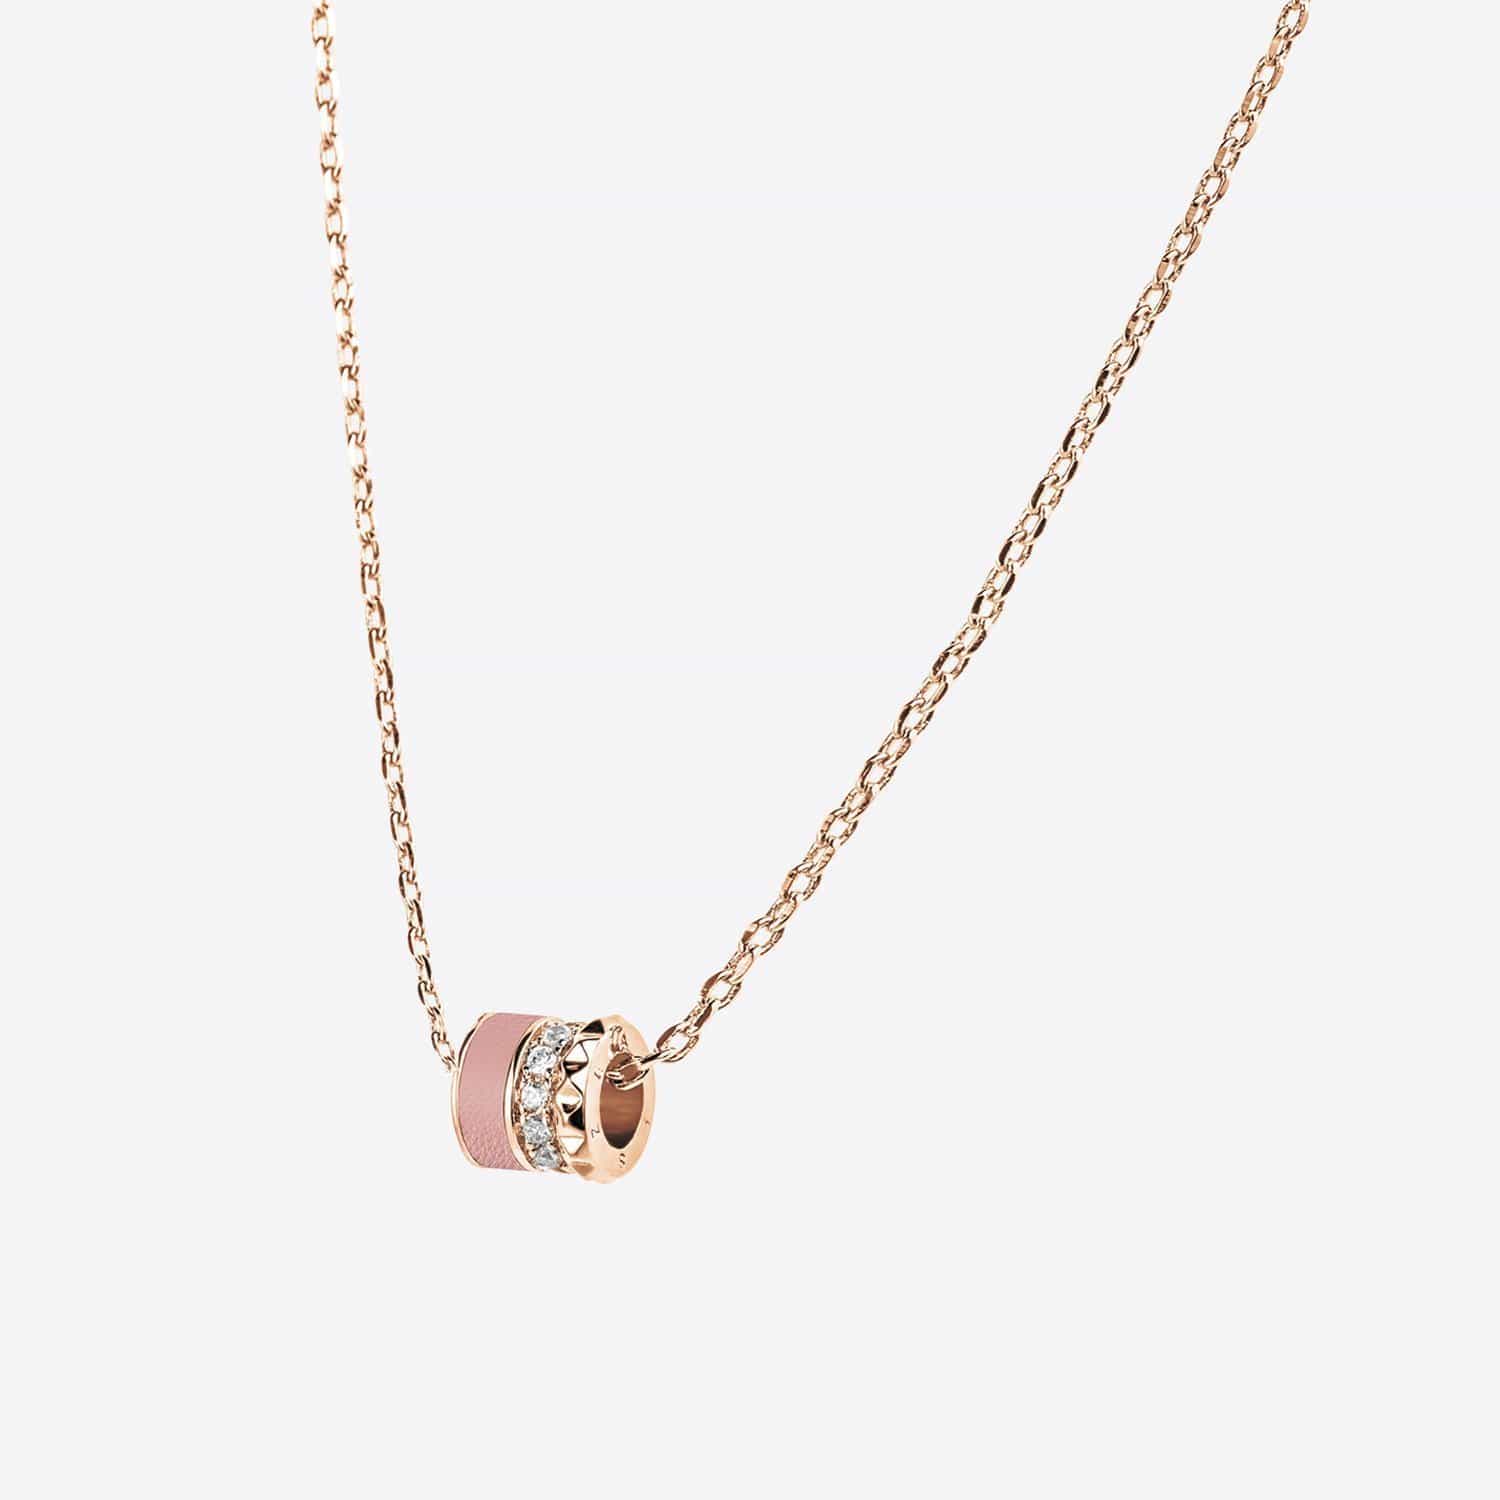 ZEADES Petit Voyage Women's Pendant - French Rose and Rose Gold - SPT01064